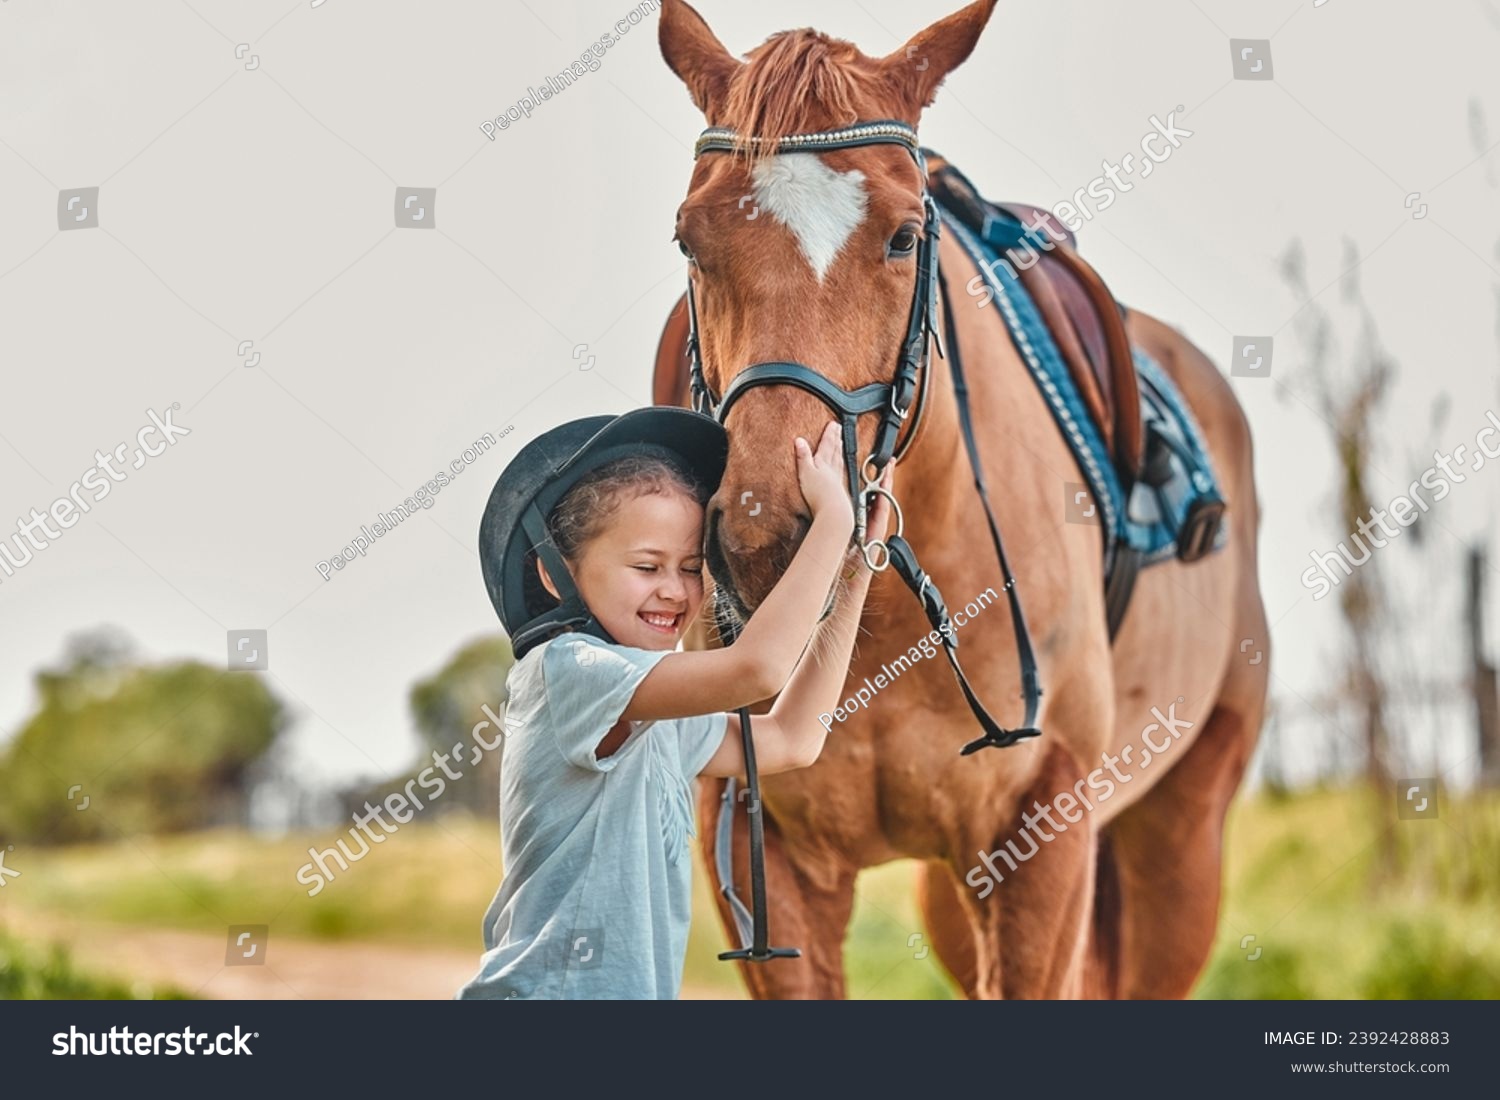 Kid, horse and smile in nature with love, adventure and care with animal, bonding together and relax on farm. Ranch, kid and pet with childhood, freedom or countryside with happiness, stallion or joy #2392428883